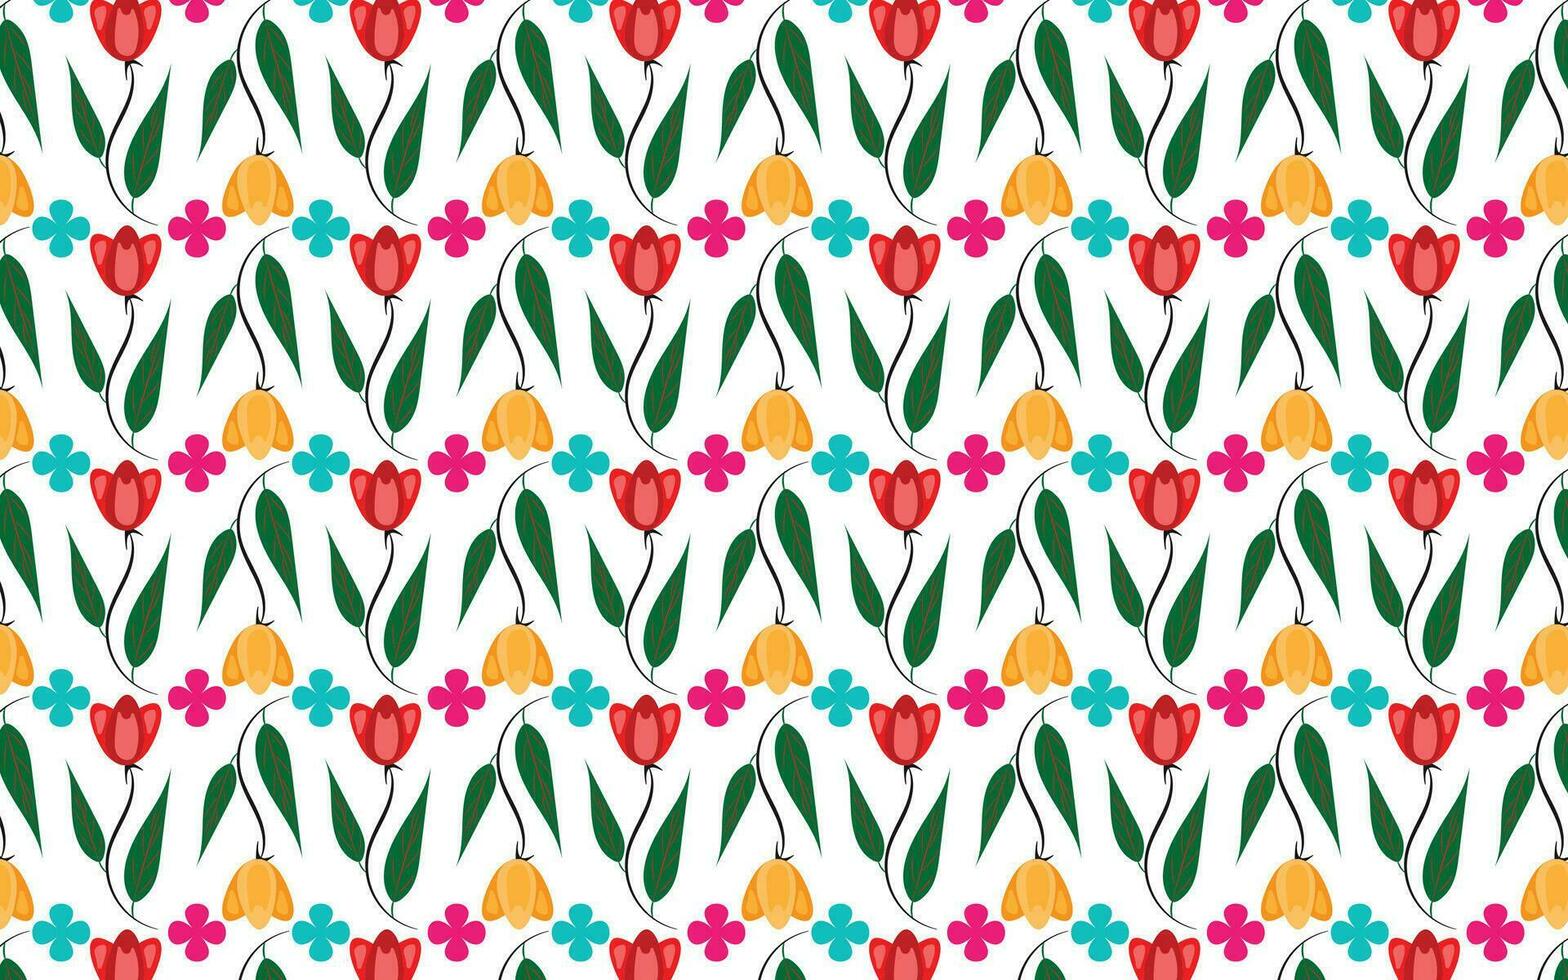 Floral pattern and background design vector